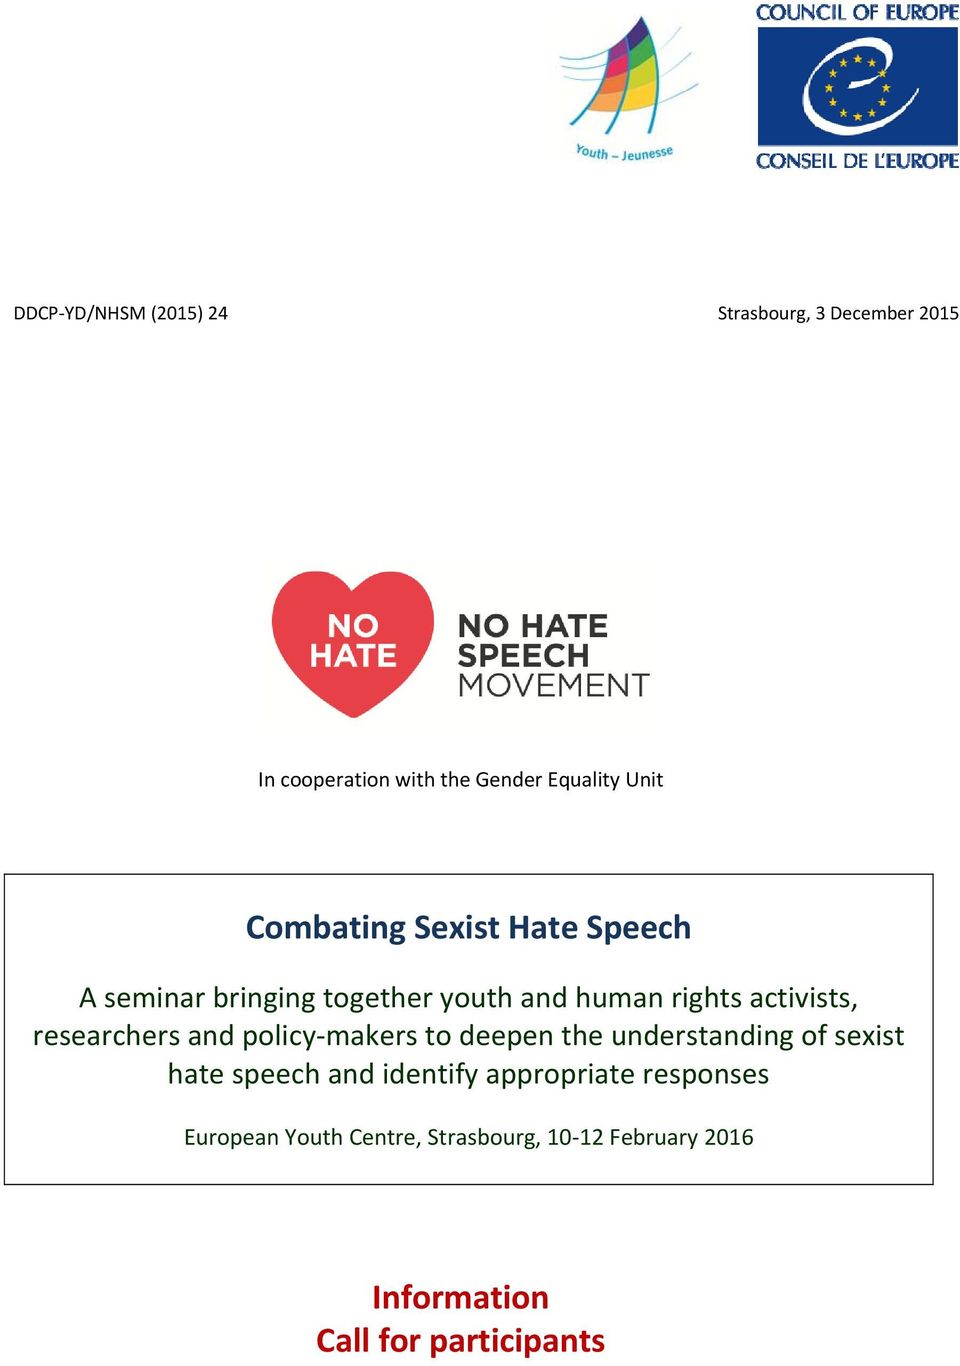 researchers and policy makers to deepen the understanding of sexist hate speech and identify